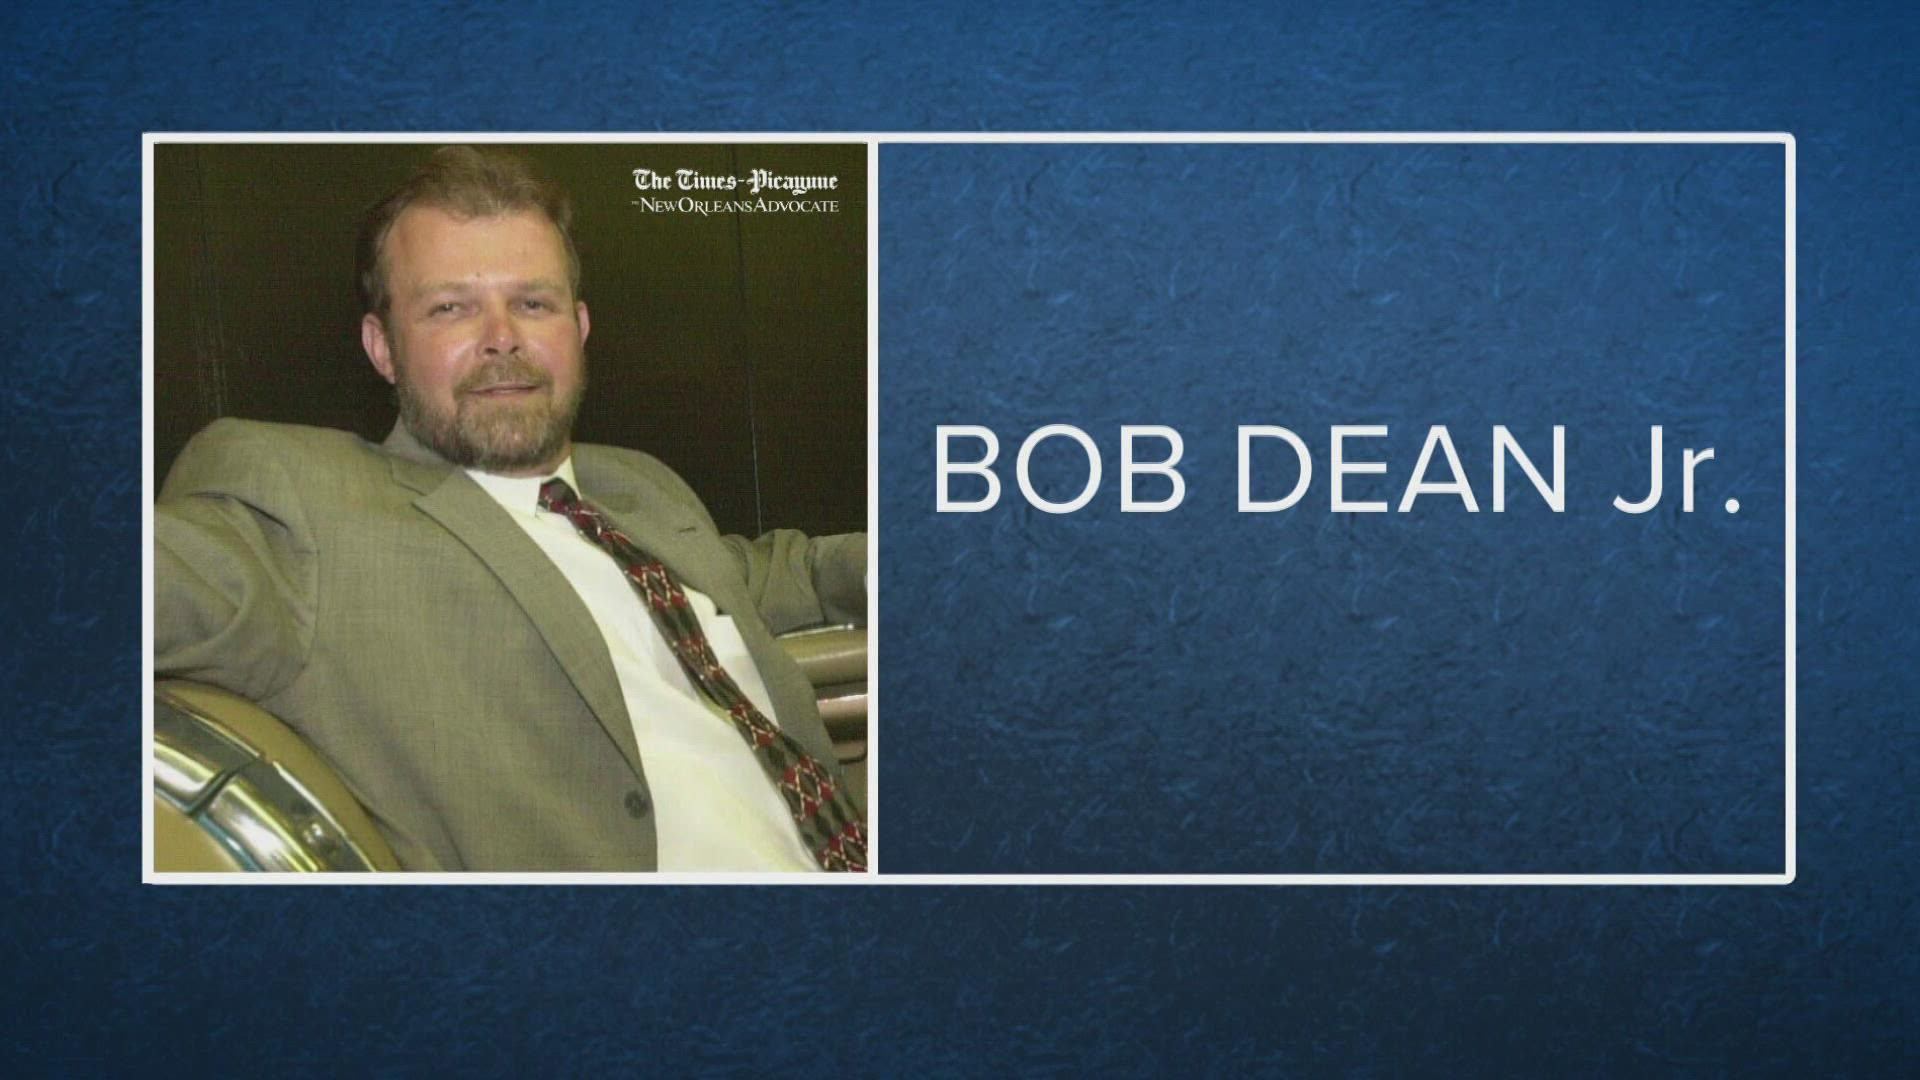 Bob Dean has legal woes regarding his nursing homes that were evacuated during Hurricane Ida and he also had some problems with a gun.